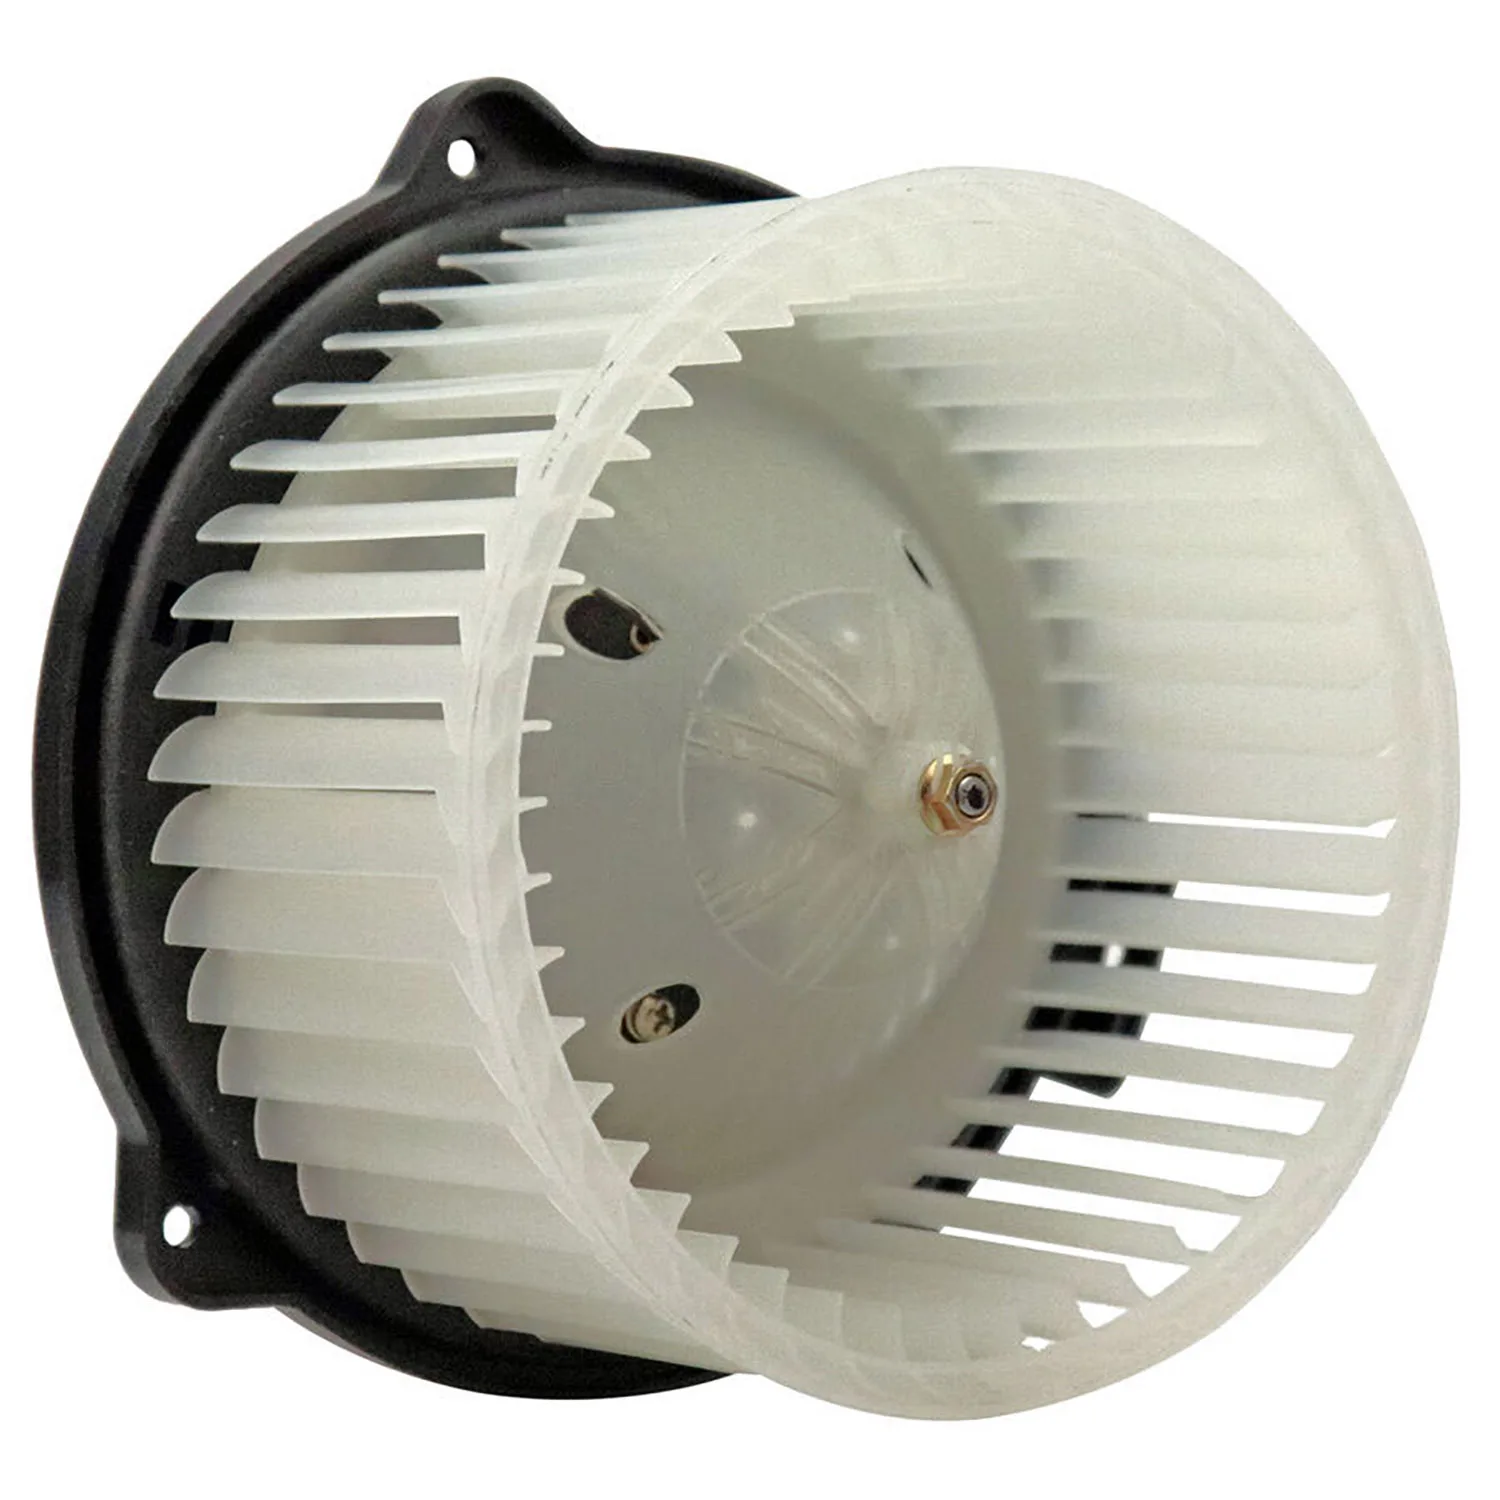 

Air Conditioning Fan AC A/C Blower Motor FOR ISZ 12V MZZ0136 1940007150 1940007153 1940007270